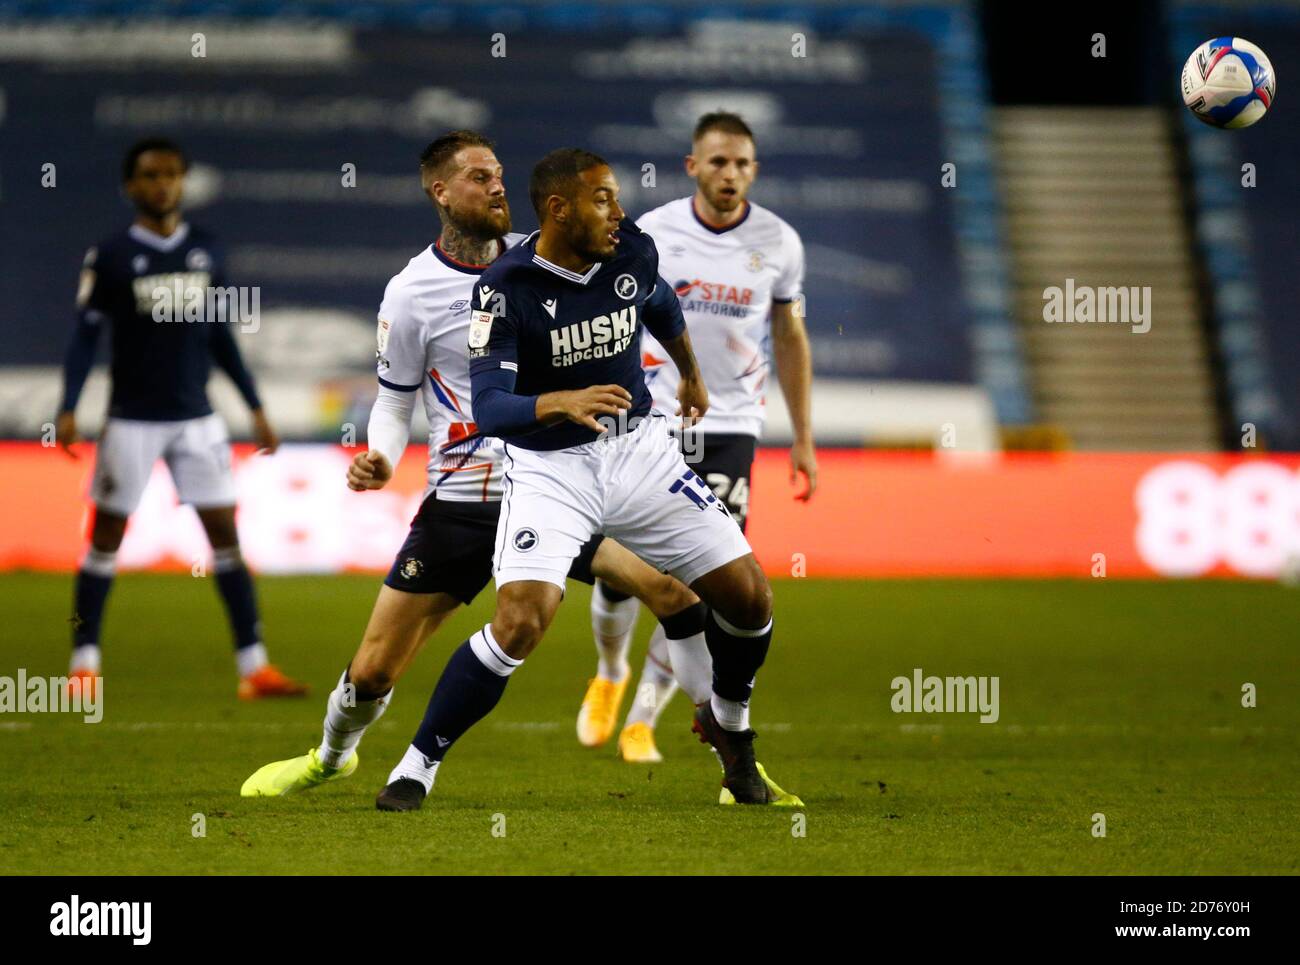 LONDON, United Kingdom, OCTOBER 20: Kenneth Zohore of Millwall during Sky Bet Championship between Millwall and of Luton Town at The Den Stadium, Lond Stock Photo